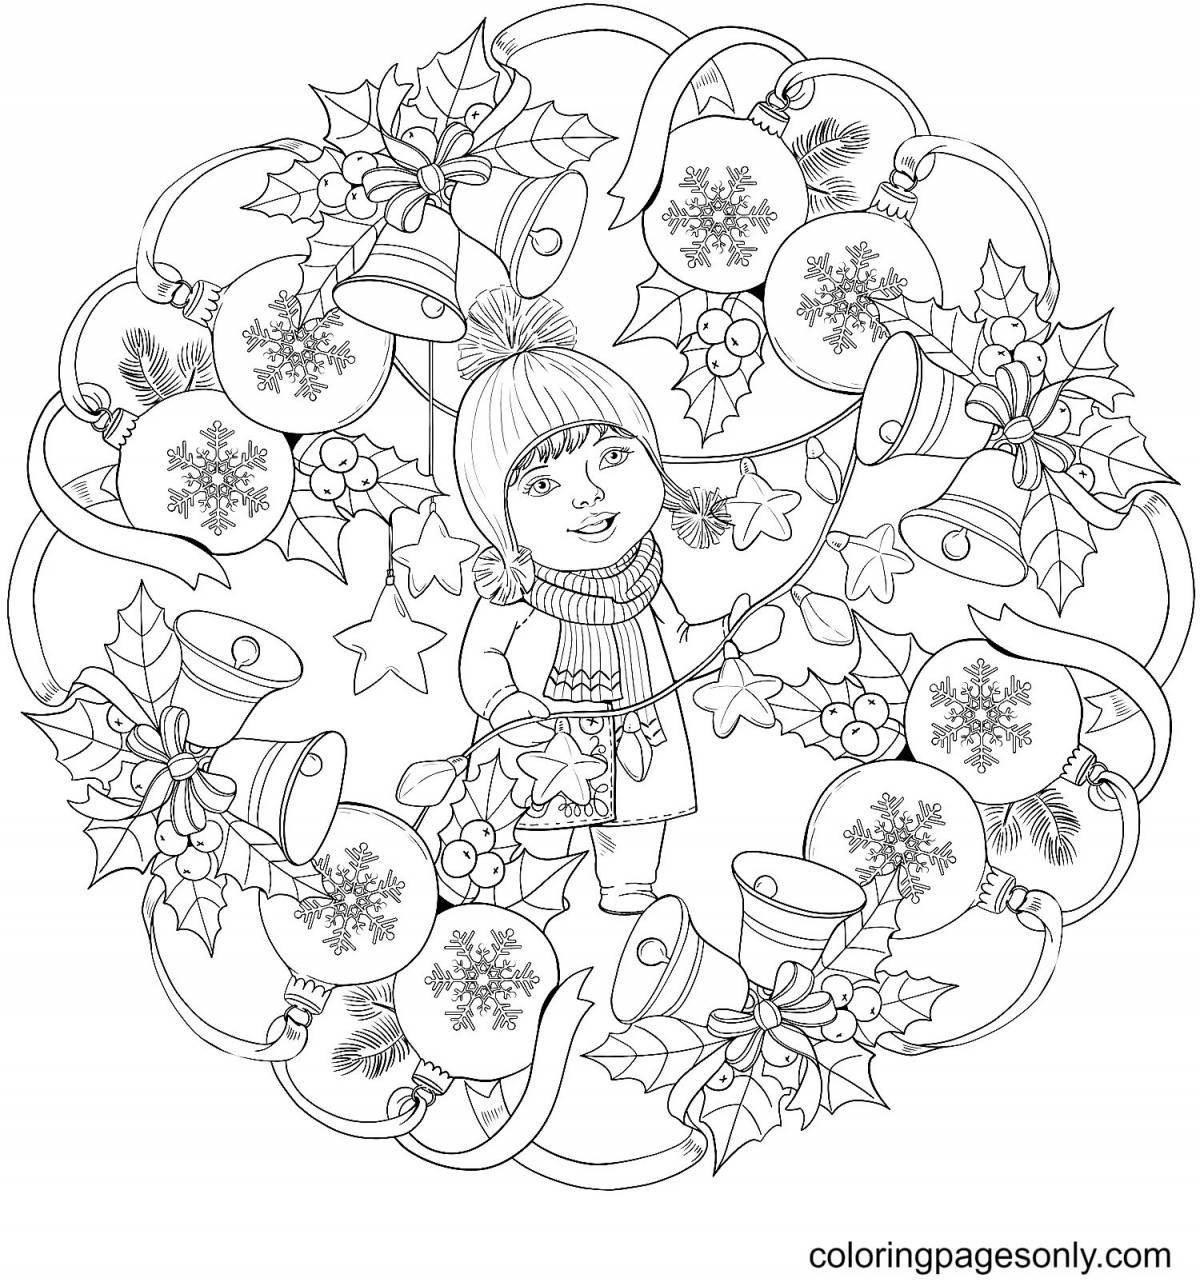 Colored Christmas anti-stress coloring book